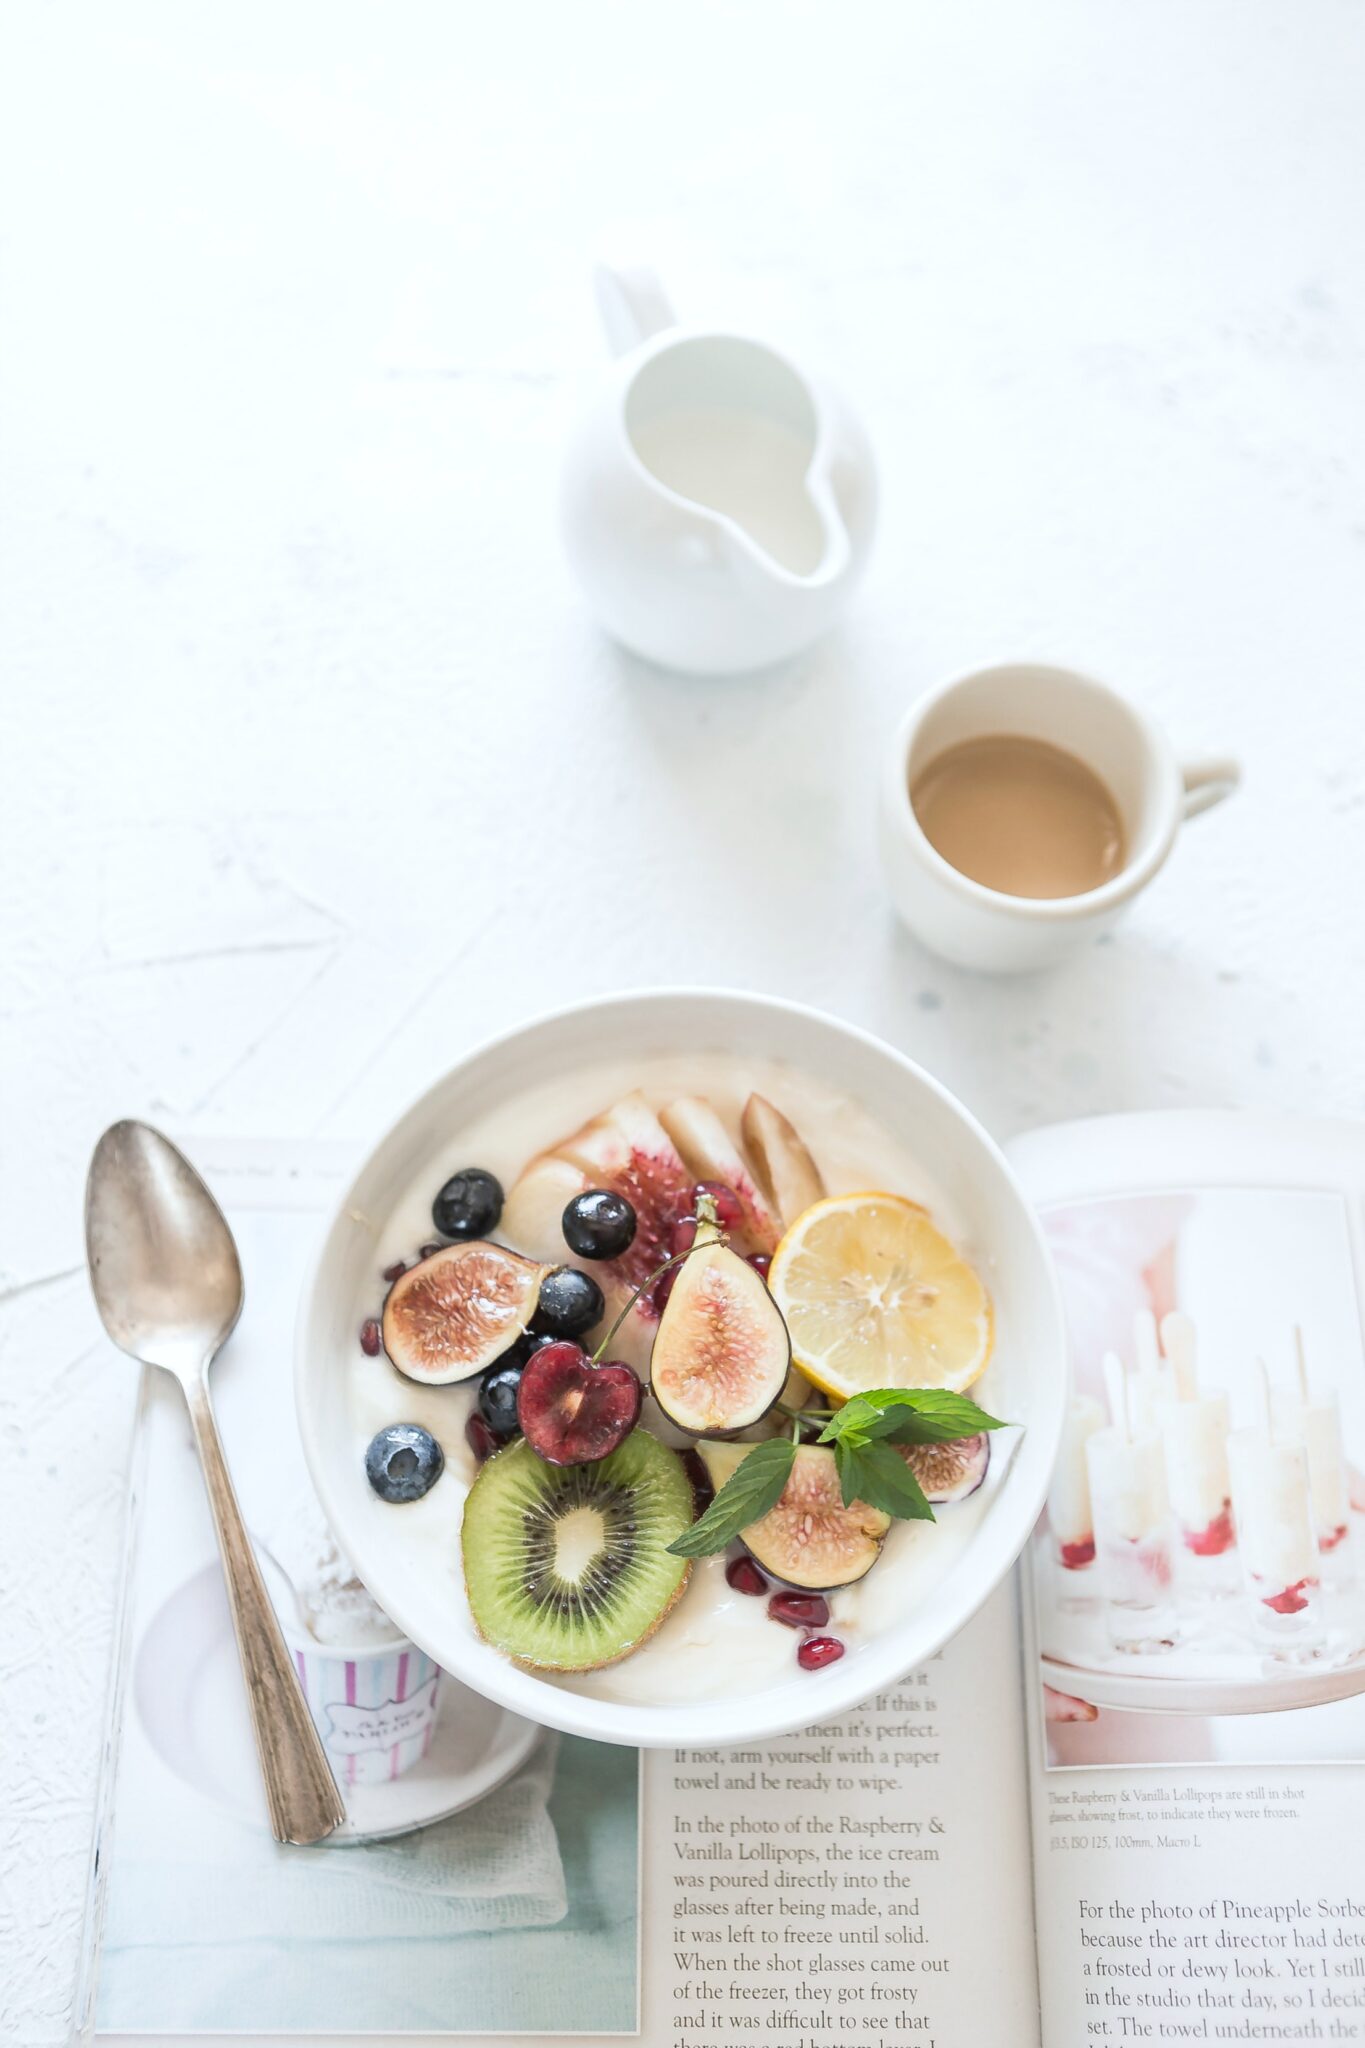 A healthy breakfast of a bowl with fruit and milk. There's a cup of coffee and a good book.